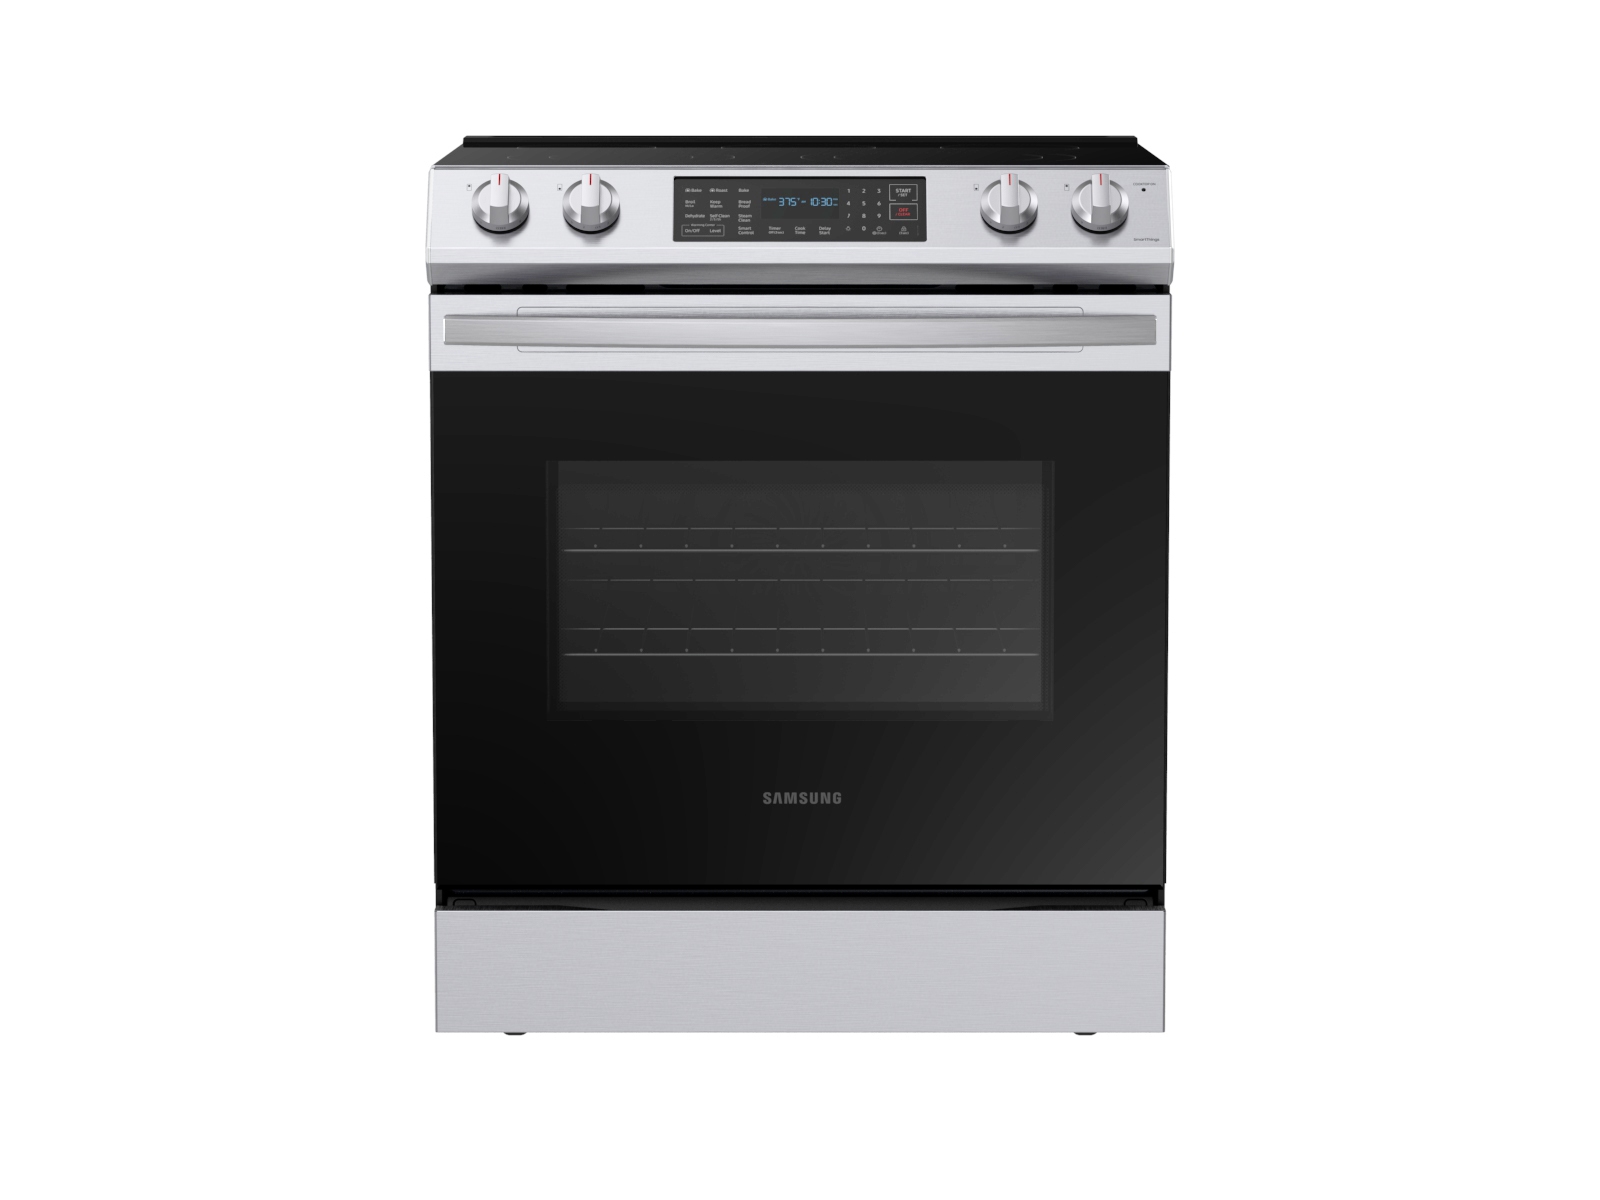  SAMSUNG NE63T8311SS 6.3 cu ft. Smart Slide-in Electric Range  with Convection in Stainless Steel : Appliances